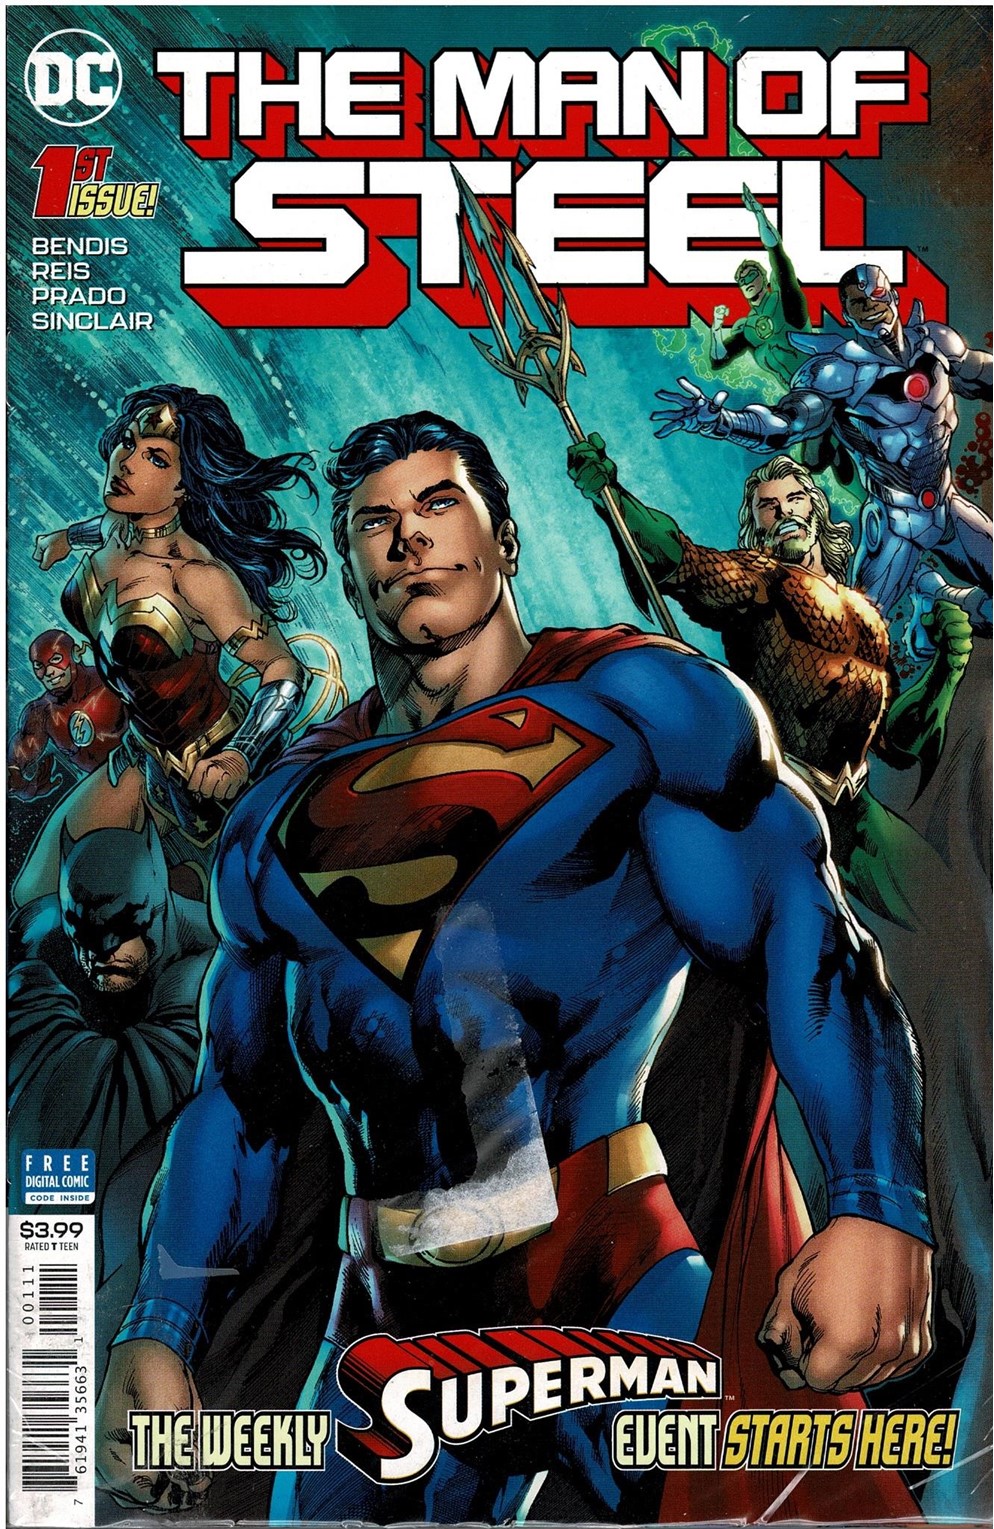 The Man of Steel #1-6